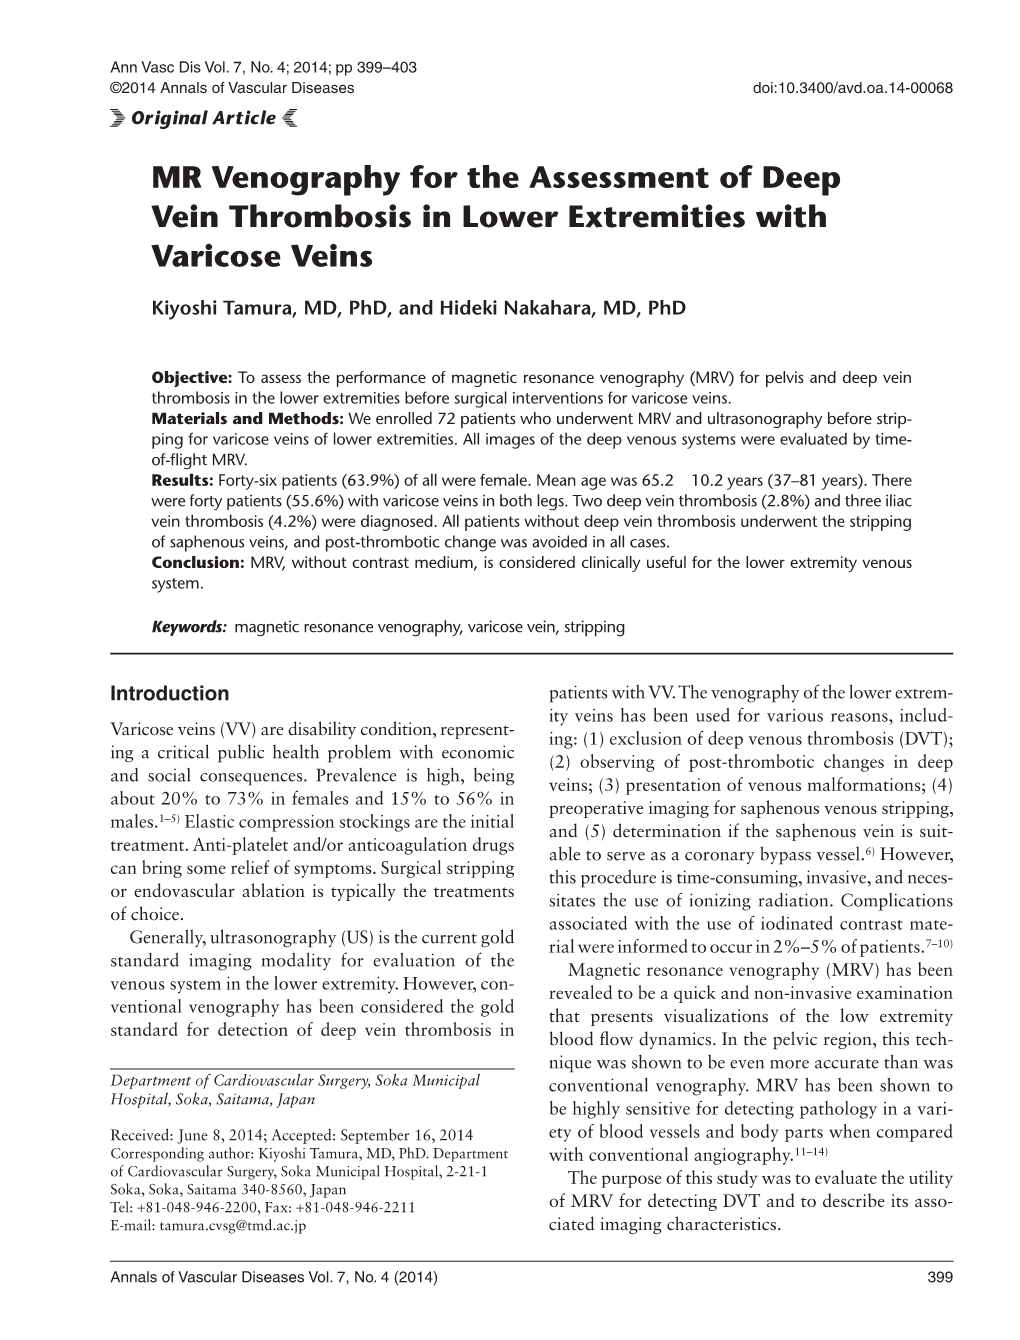 MR Venography for the Assessment of Deep Vein Thrombosis in Lower Extremities with Varicose Veins